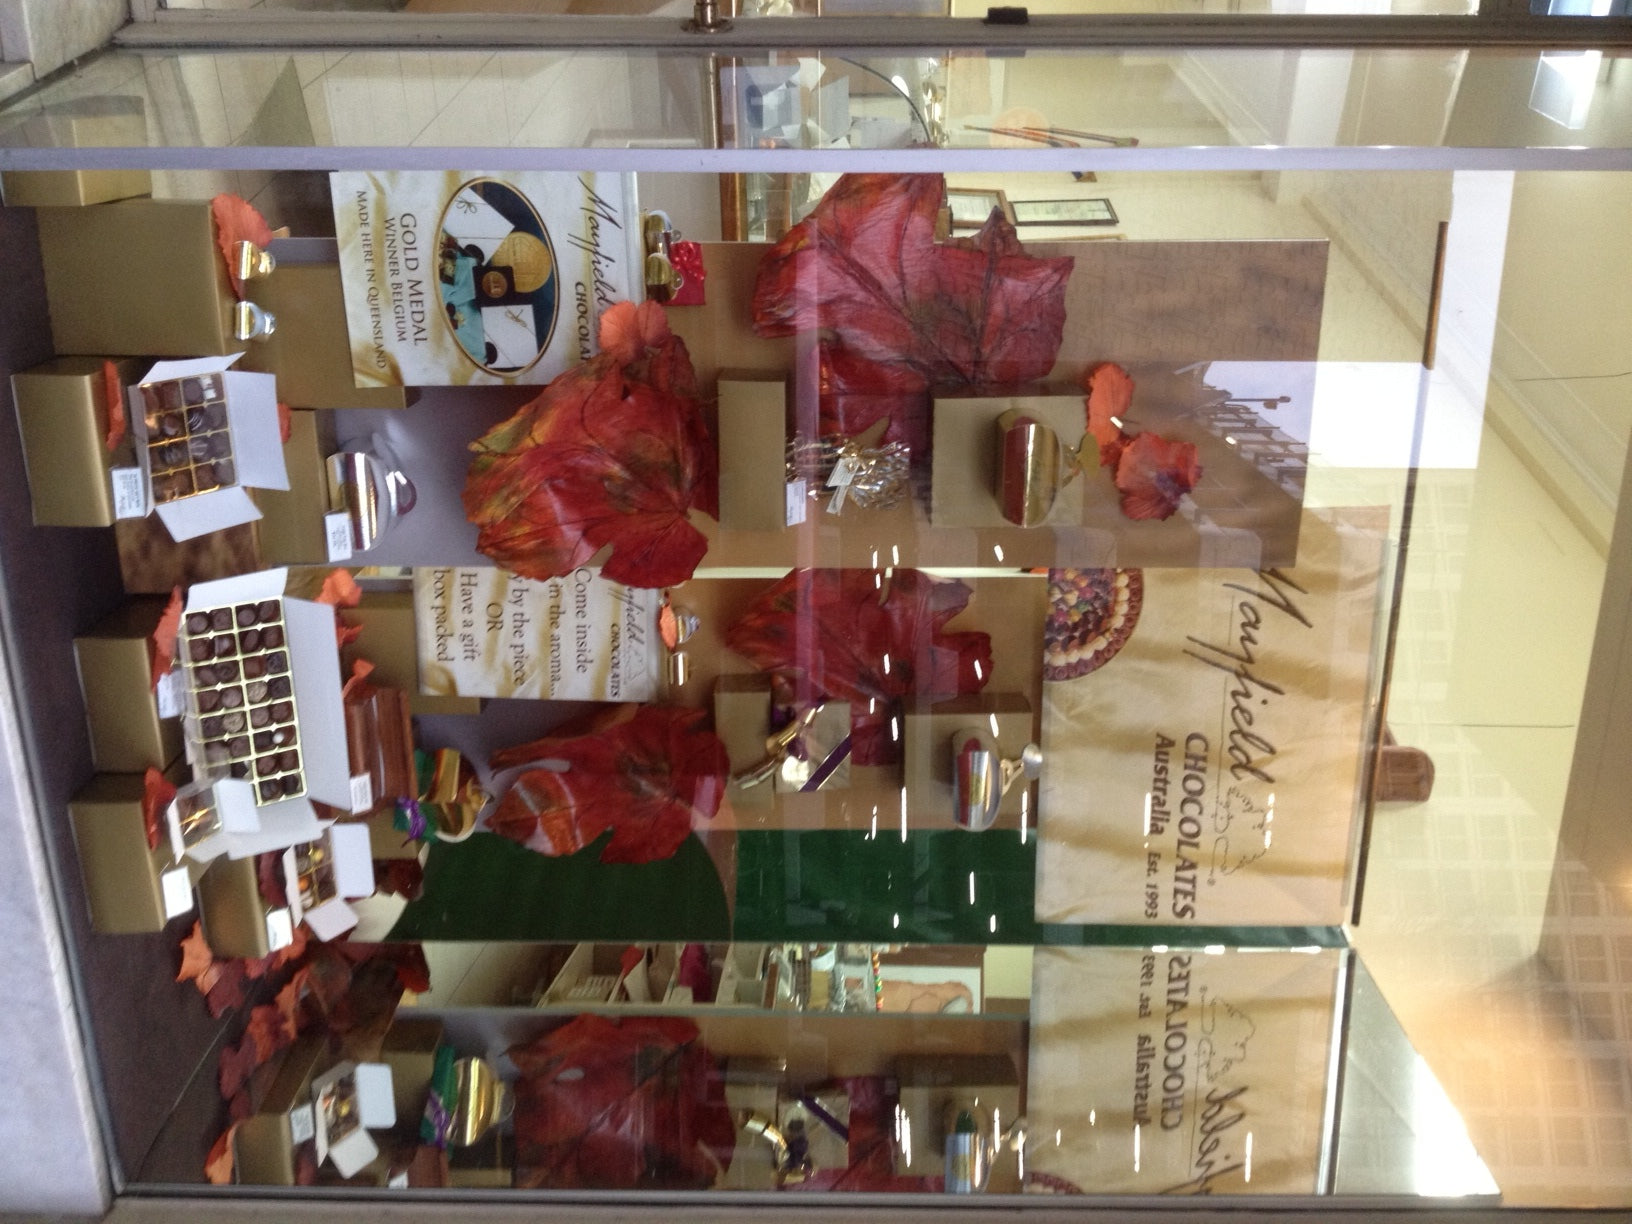 Brisbane's most delicious Chocolates and Visual Merchandising to match. Thank you Mark Reese.